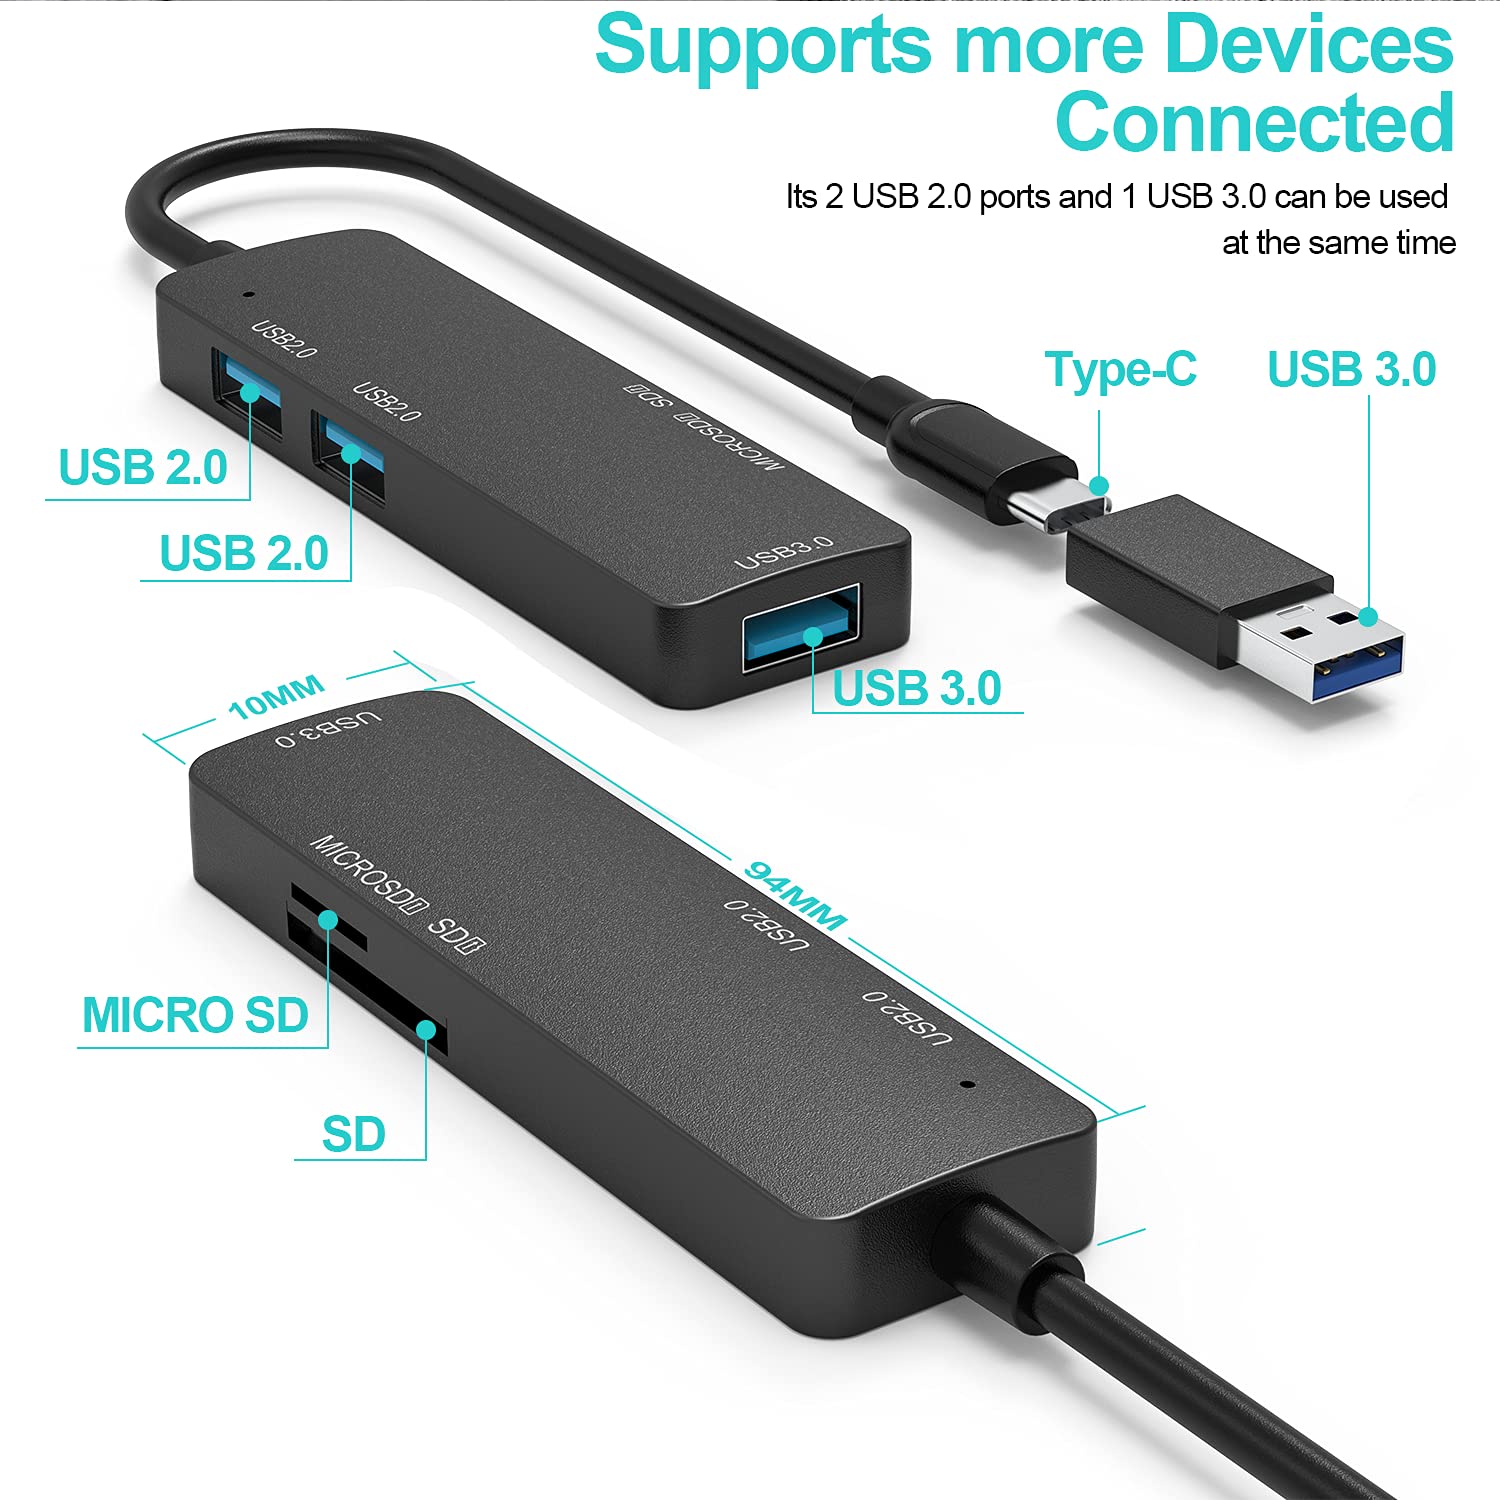 USB C Hub 5 in 1 USB C to 3.0 Splitter with 1 USB 3.0 Port, 2 USB 2.0 Port,SD/TF Card Reader, and USB A 3.0 Adapter Compatible for USB C Phones,MacBook Pro, Chromebook, ipad, XPS, andUSB Adevices